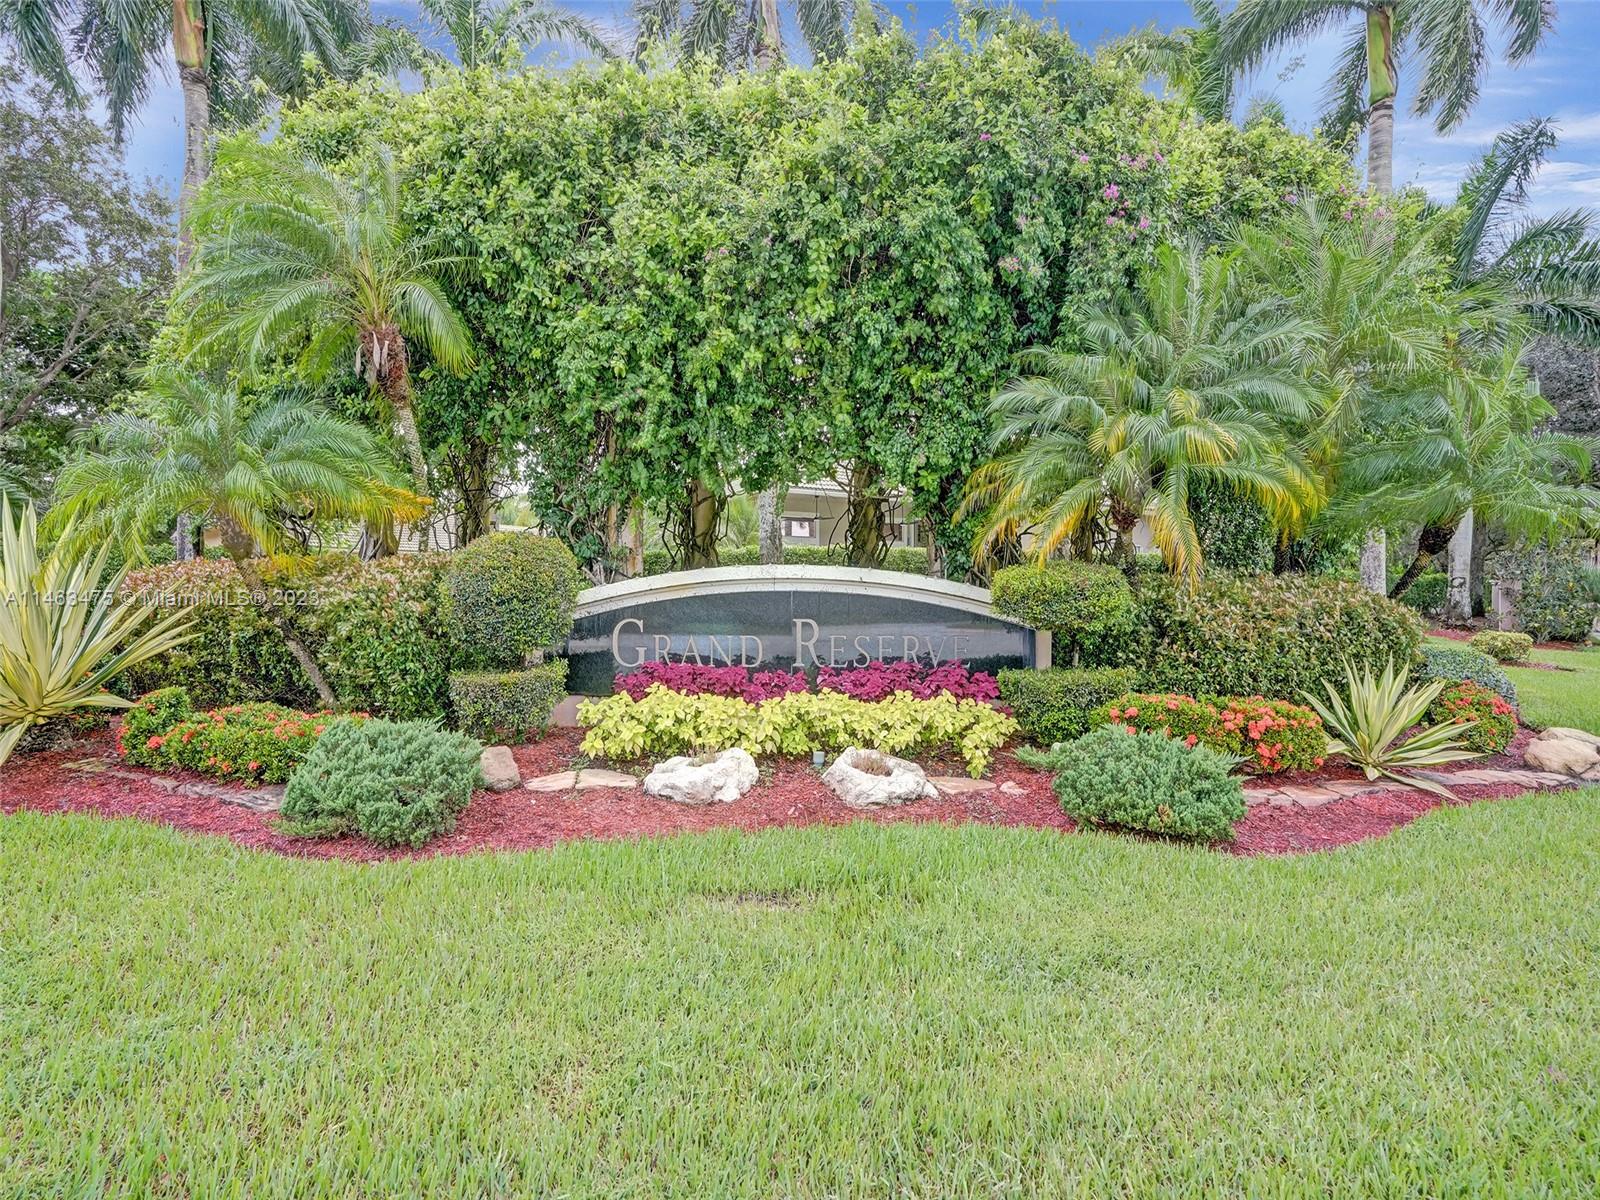 Address Not Disclosed, Coral Springs, Broward County, Florida - 5 Bedrooms  
3 Bathrooms - 